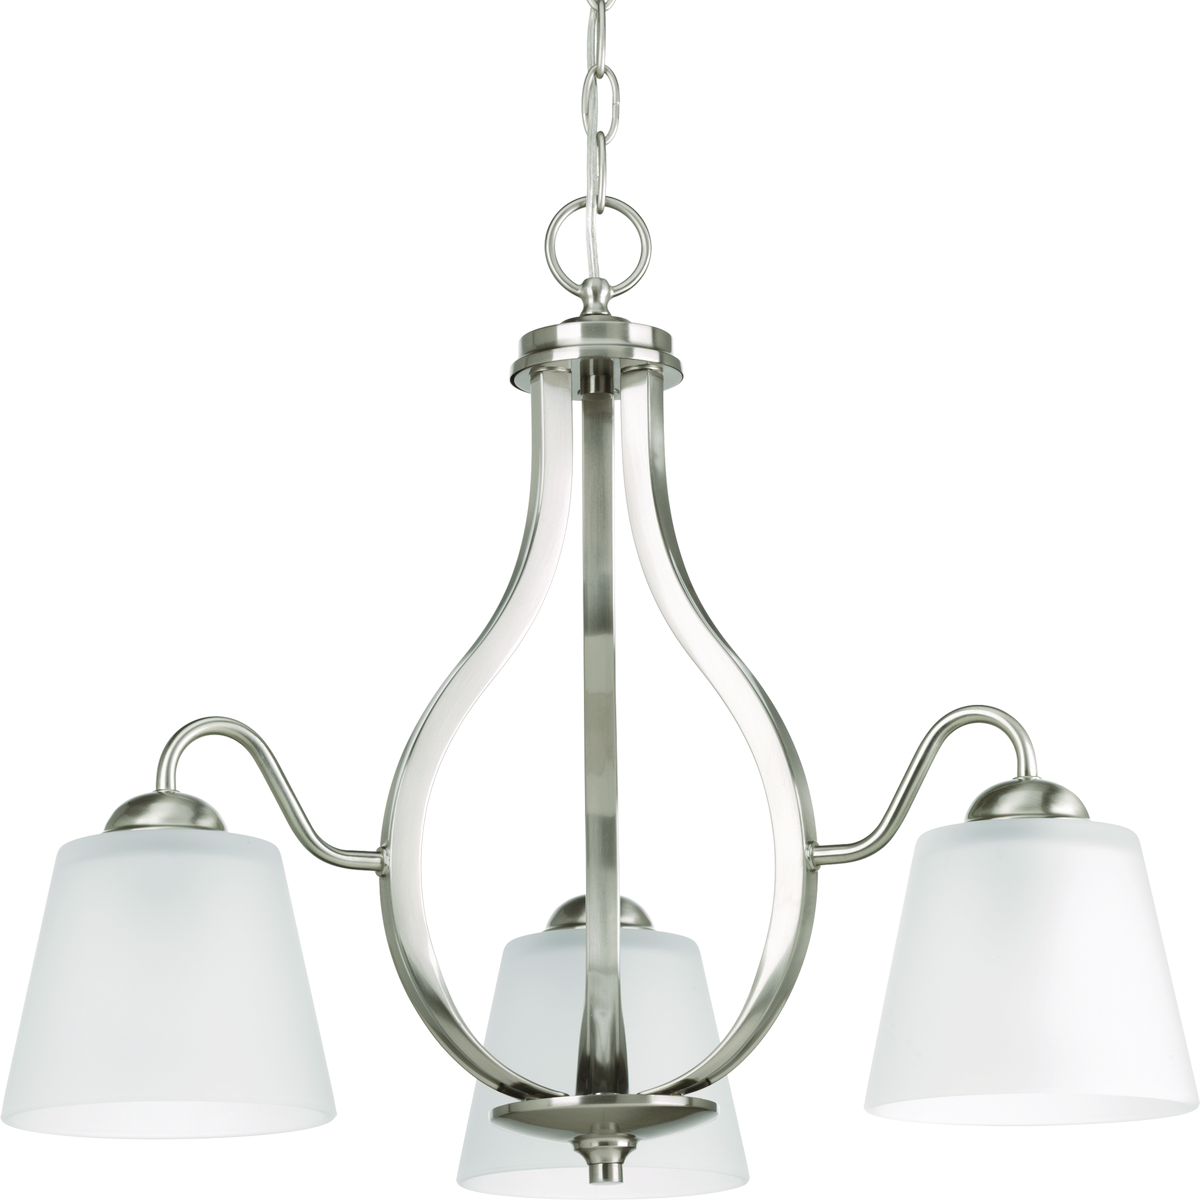 The three-light chandelier from the Arden collection offers a comfortable silhouette that is both rustic and modern. A substantial frame is crafted from overscaled tubing with complementing etched glass shades. This transitional style fixture is finished in Brushed Nickel.